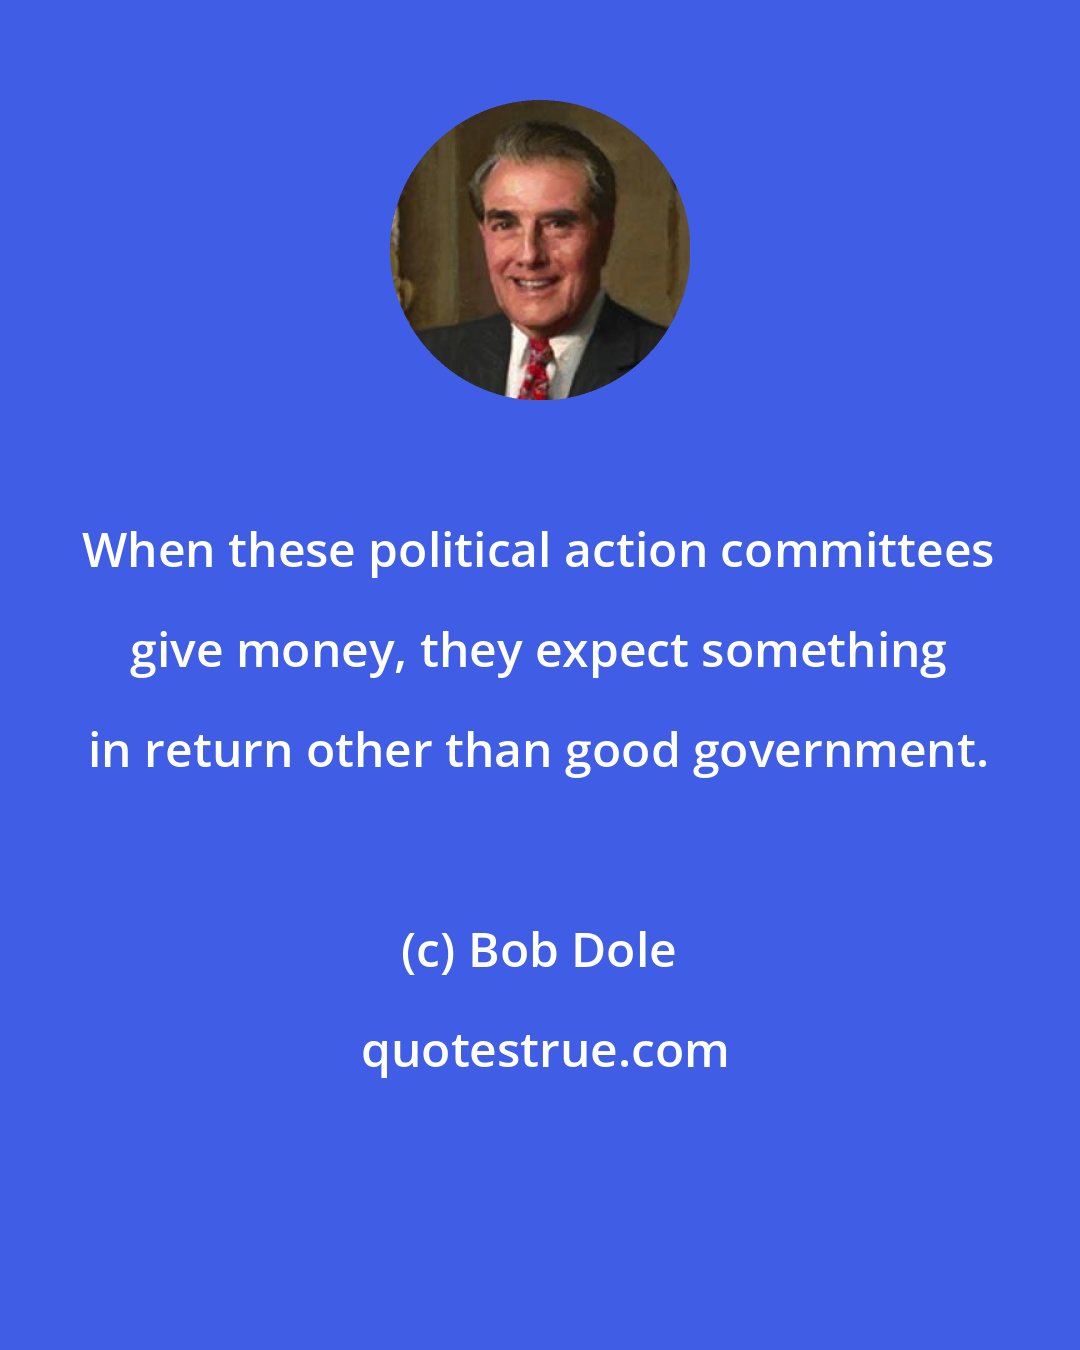 Bob Dole: When these political action committees give money, they expect something in return other than good government.